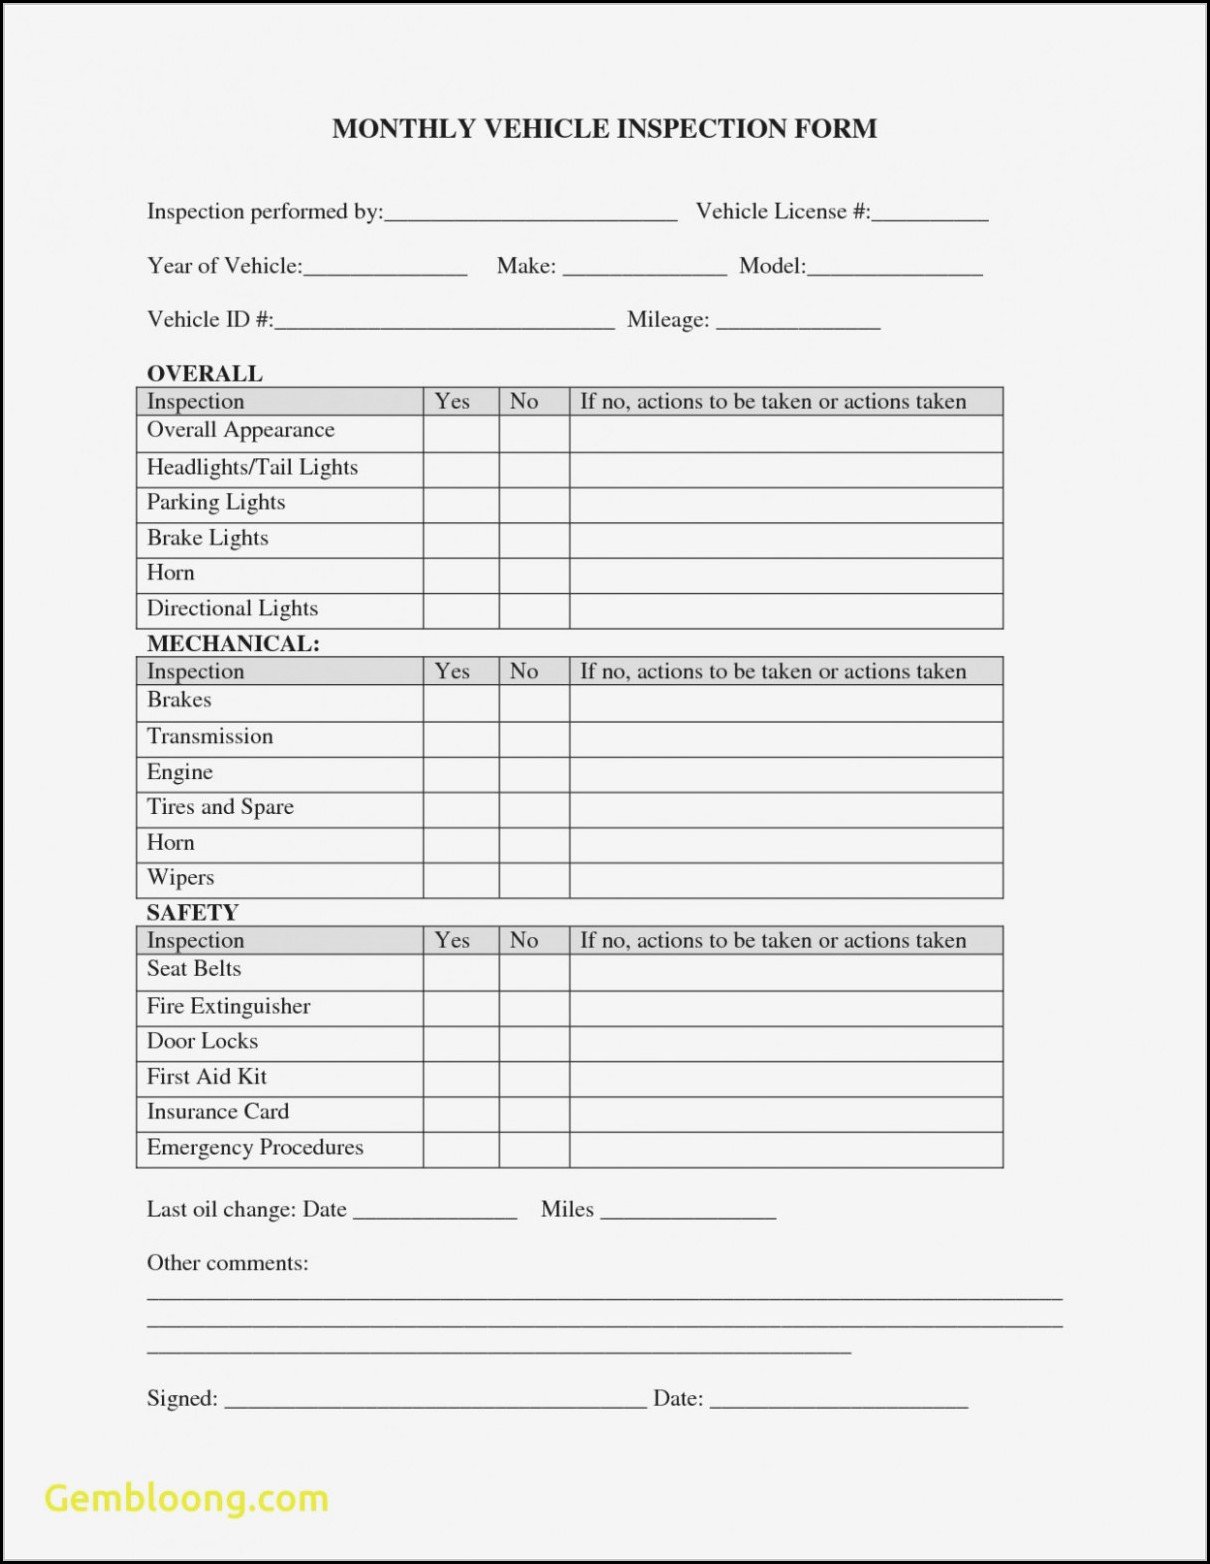 Vehicle Inspection Checklist Template New Daily Vehicle Inspection form Template form Resume